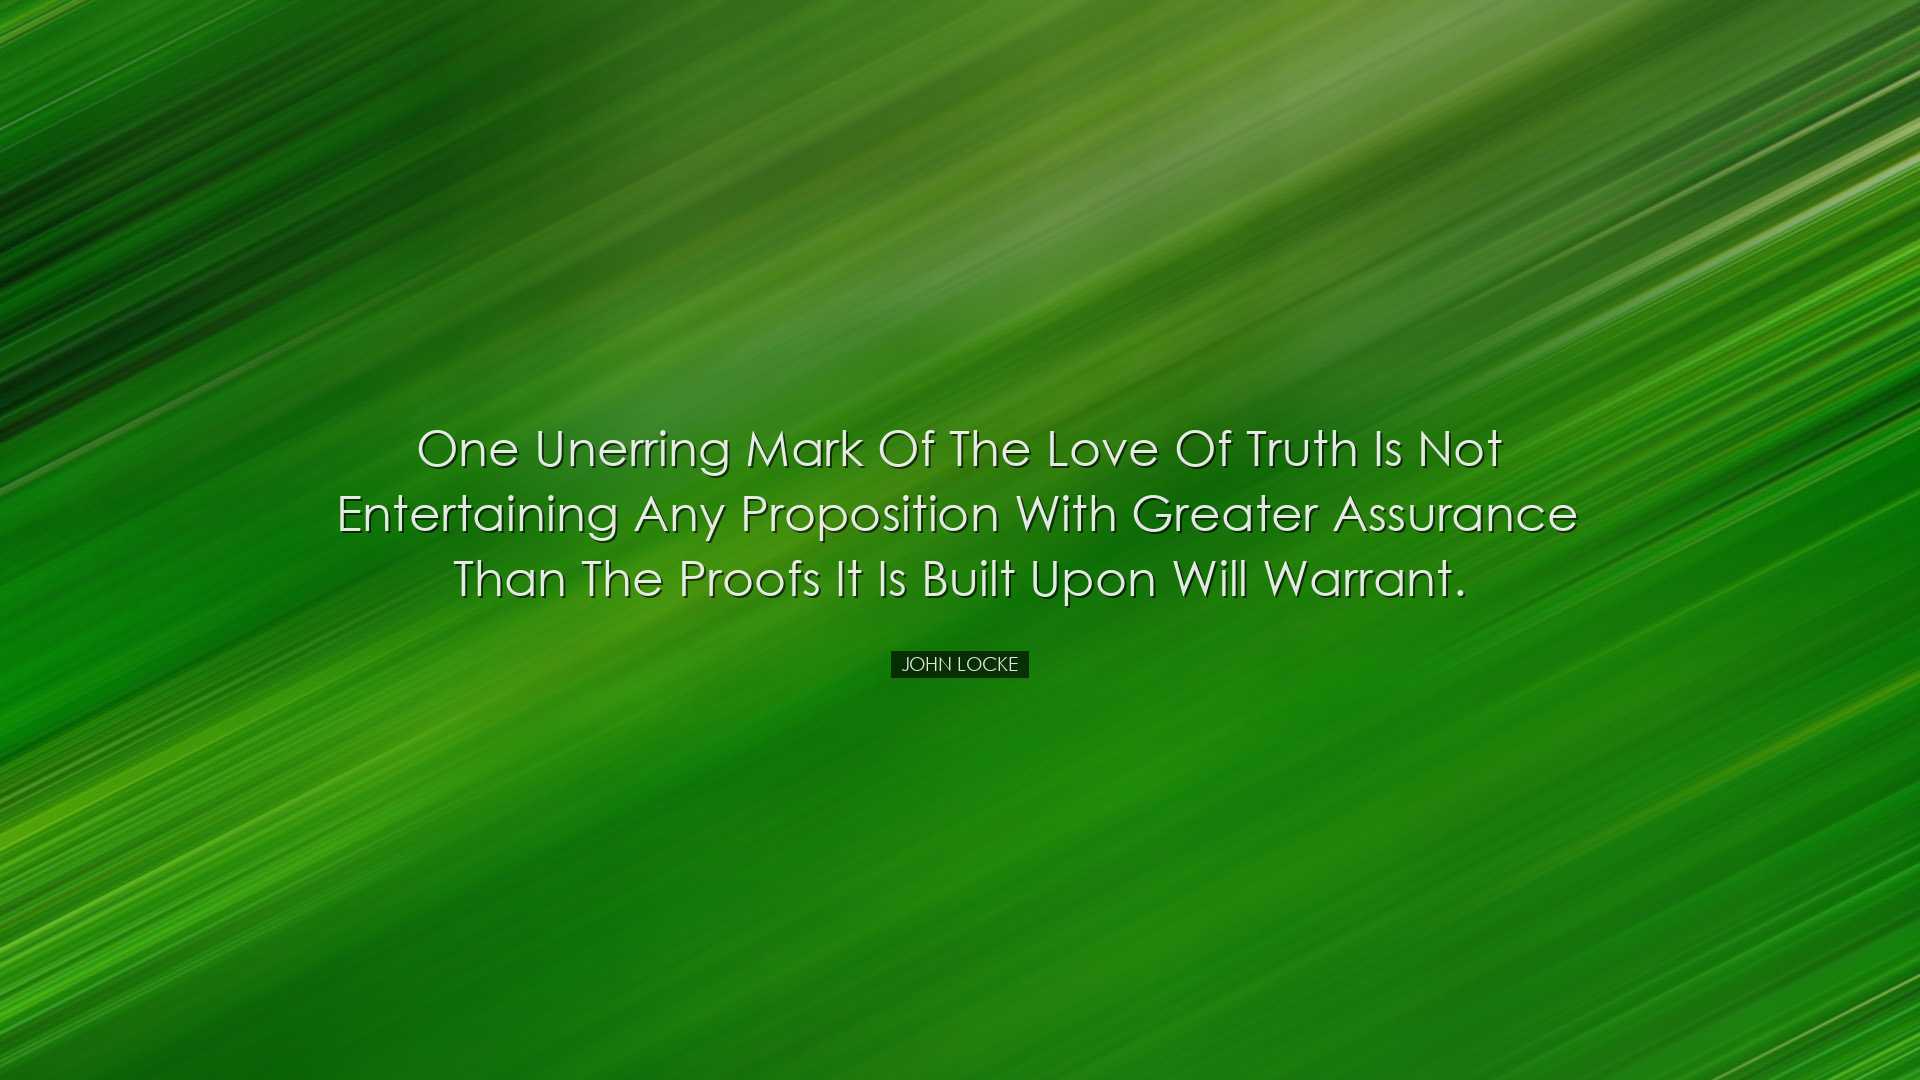 One unerring mark of the love of truth is not entertaining any pro